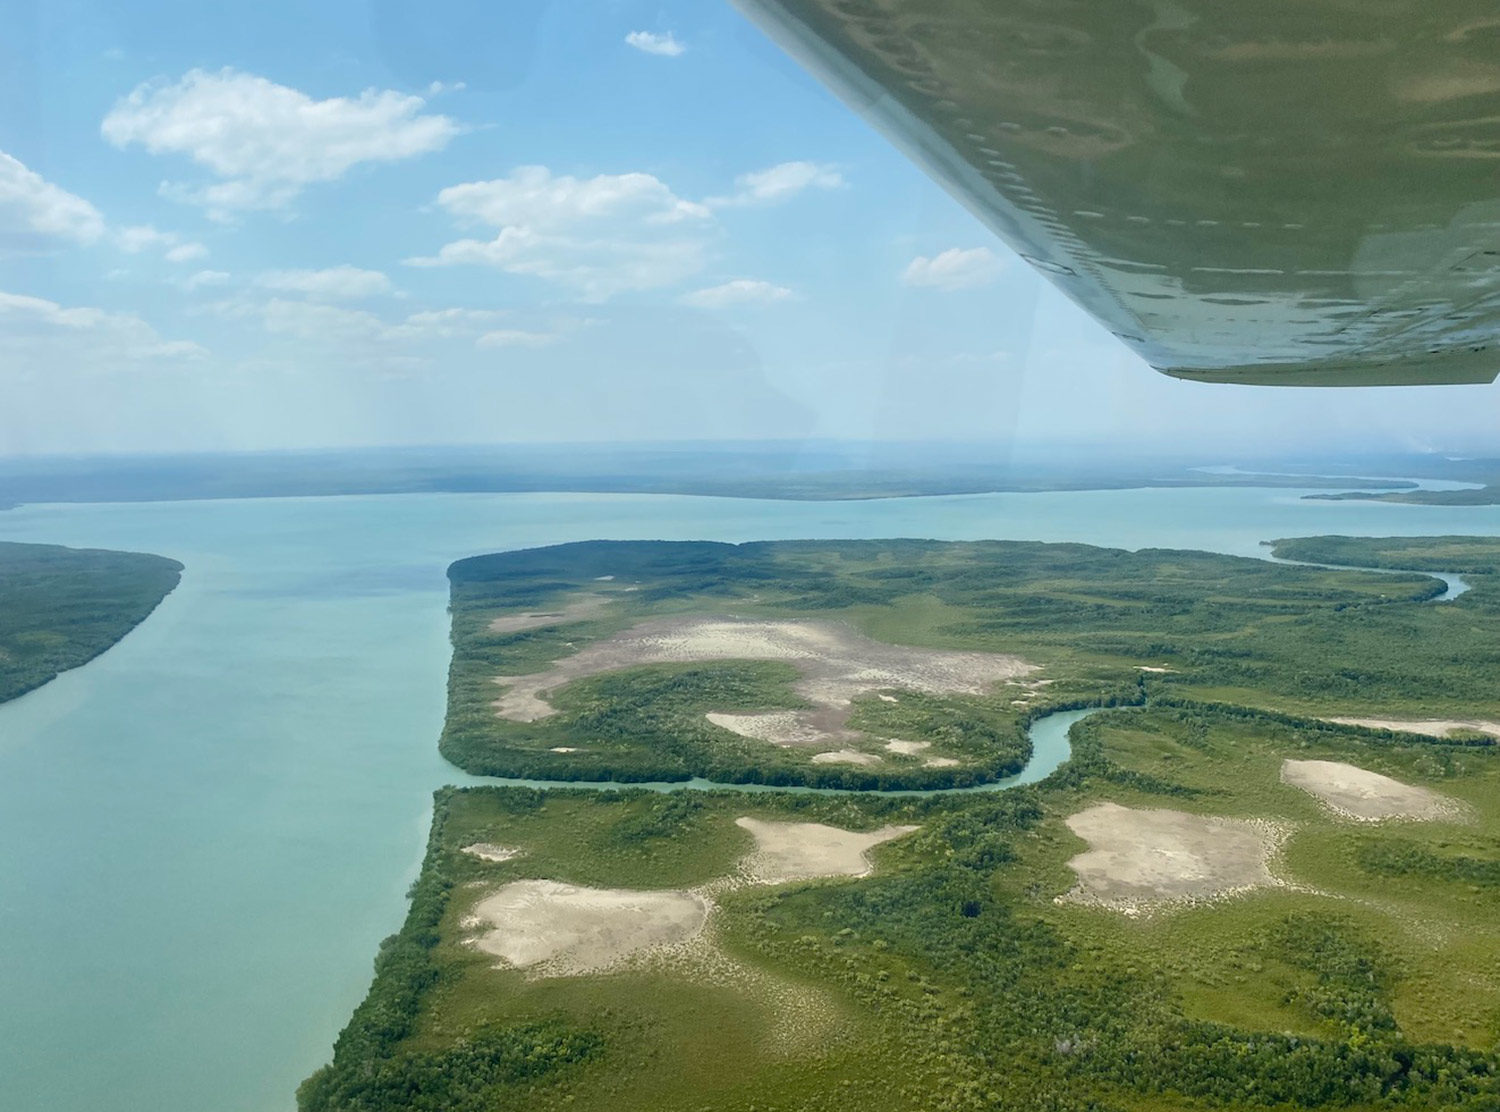 Tiwi Island Retreat The view over the Tiwi Islands from the plane is just as extraordinary as the island experience itself